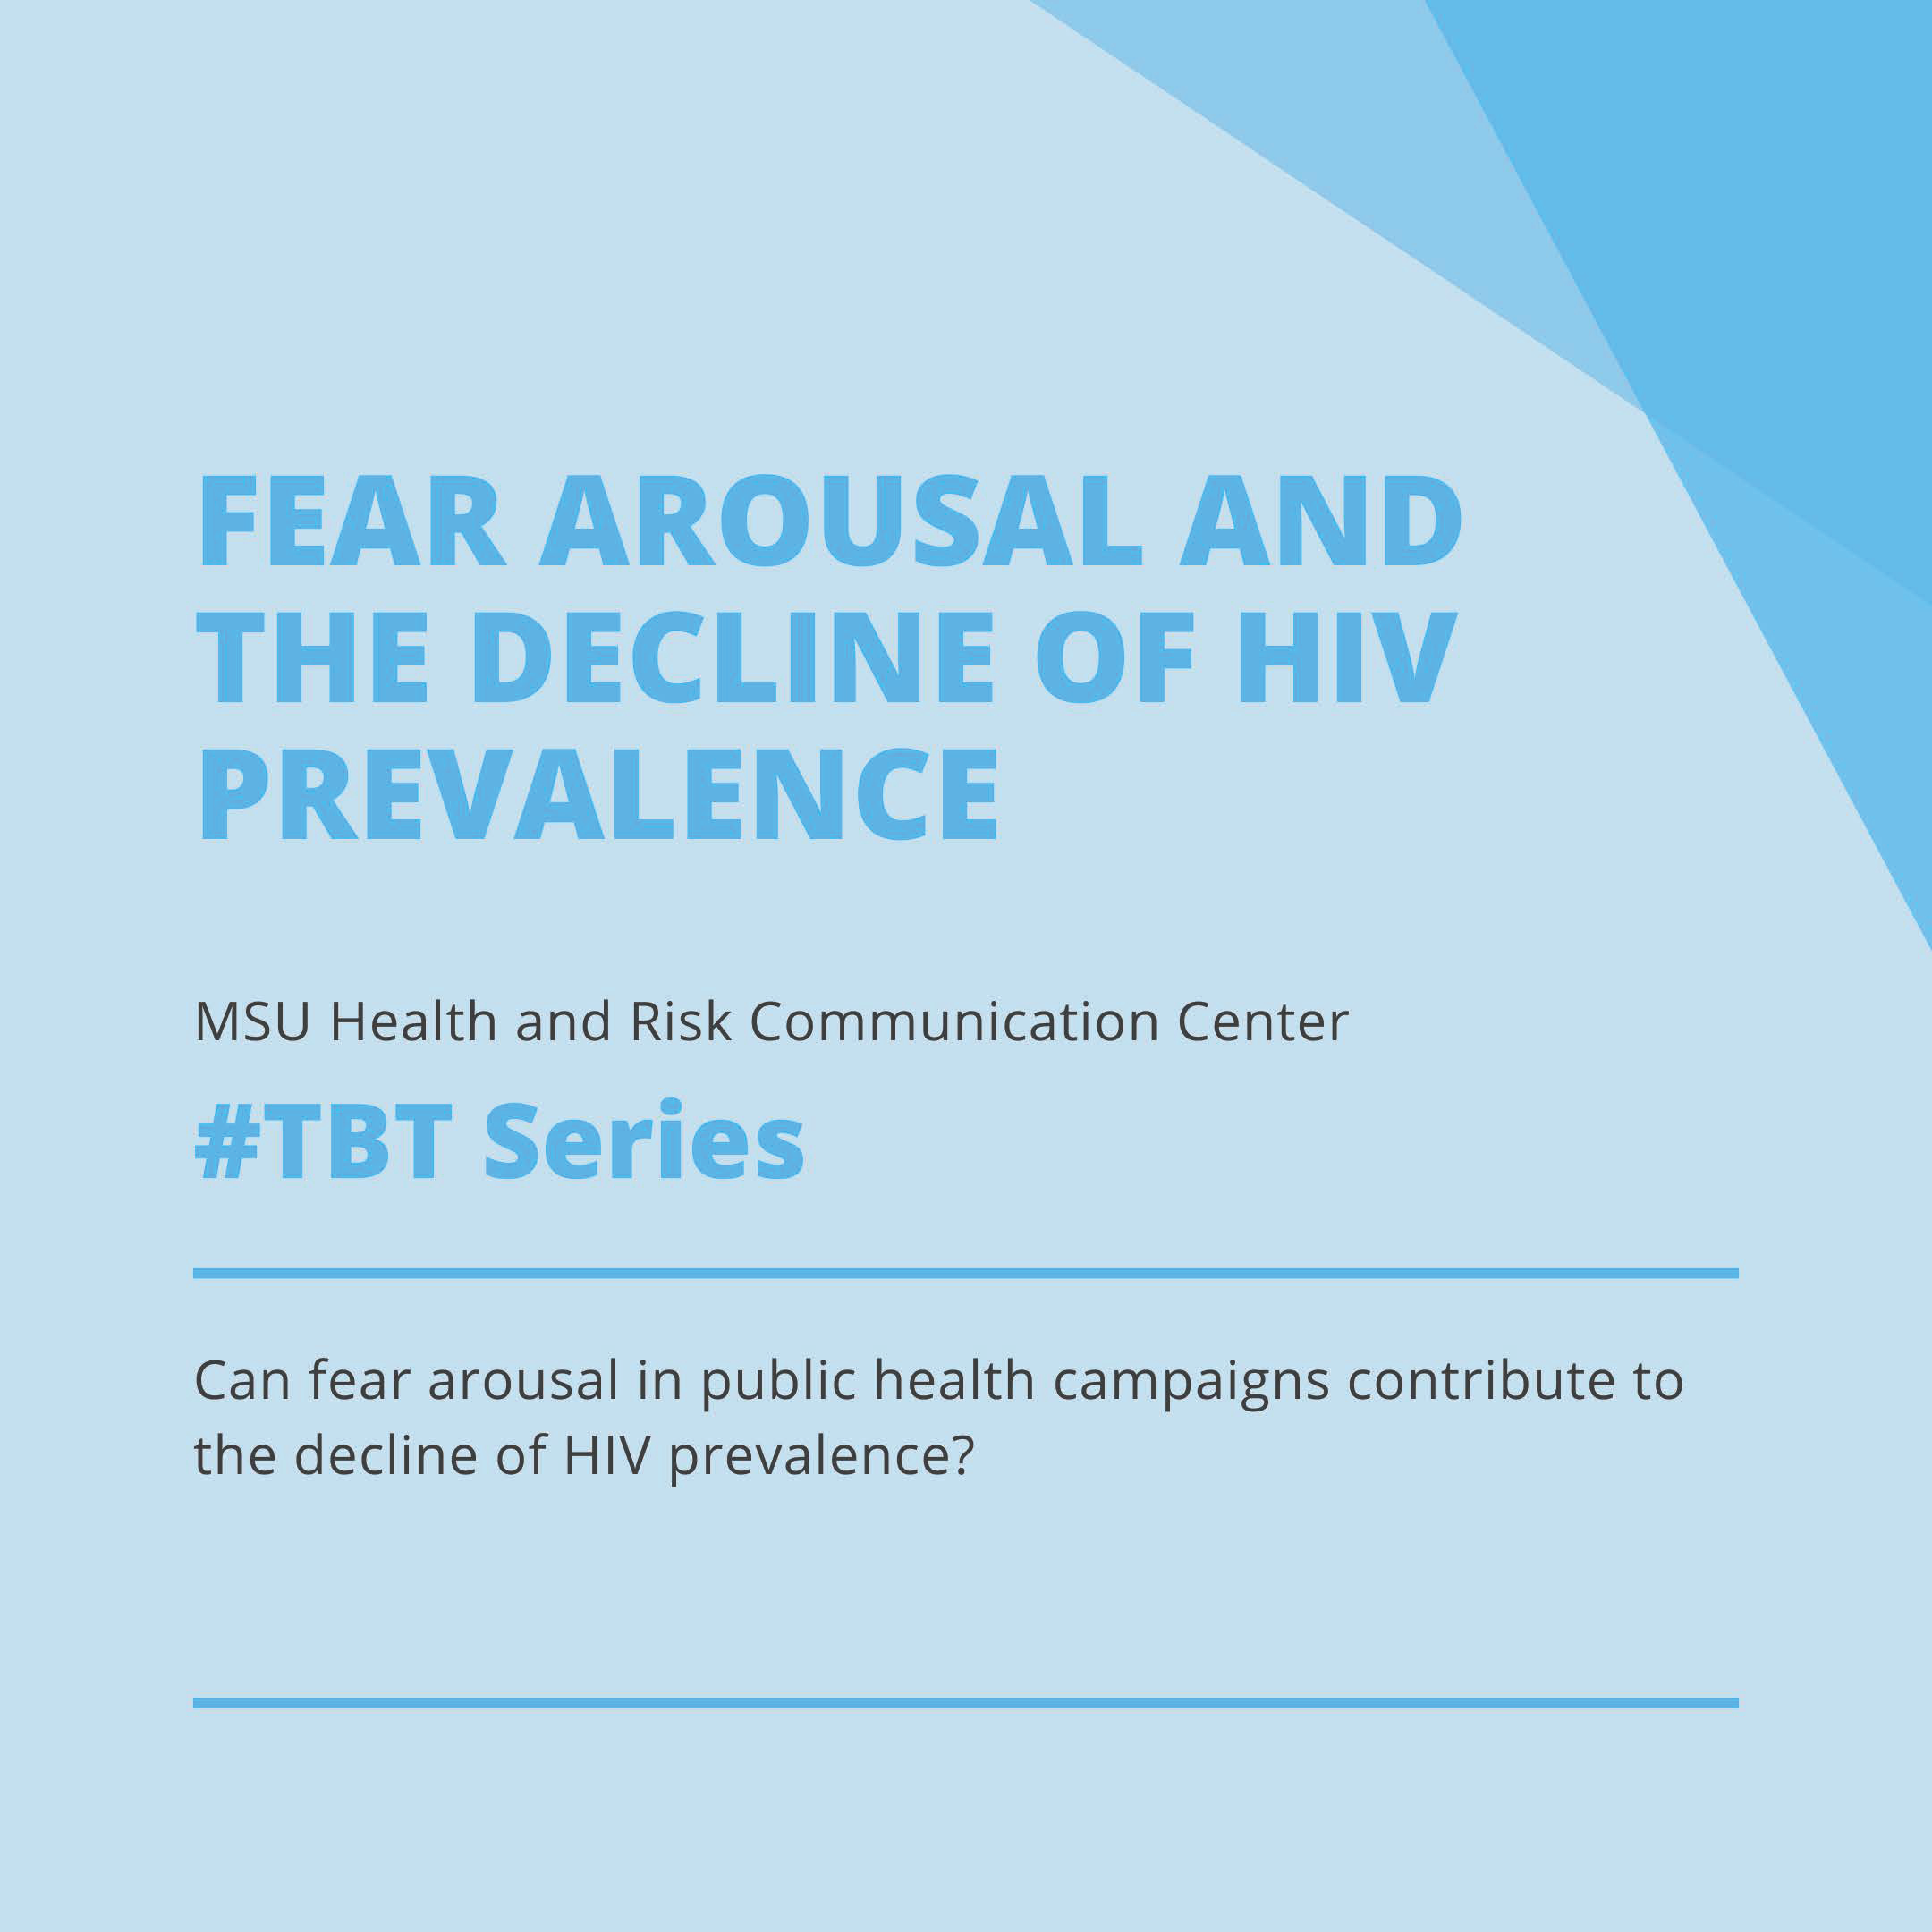 Can Fear Arousal in Public Health Campaigns Contribute to the Decline of HIV Prevalence?